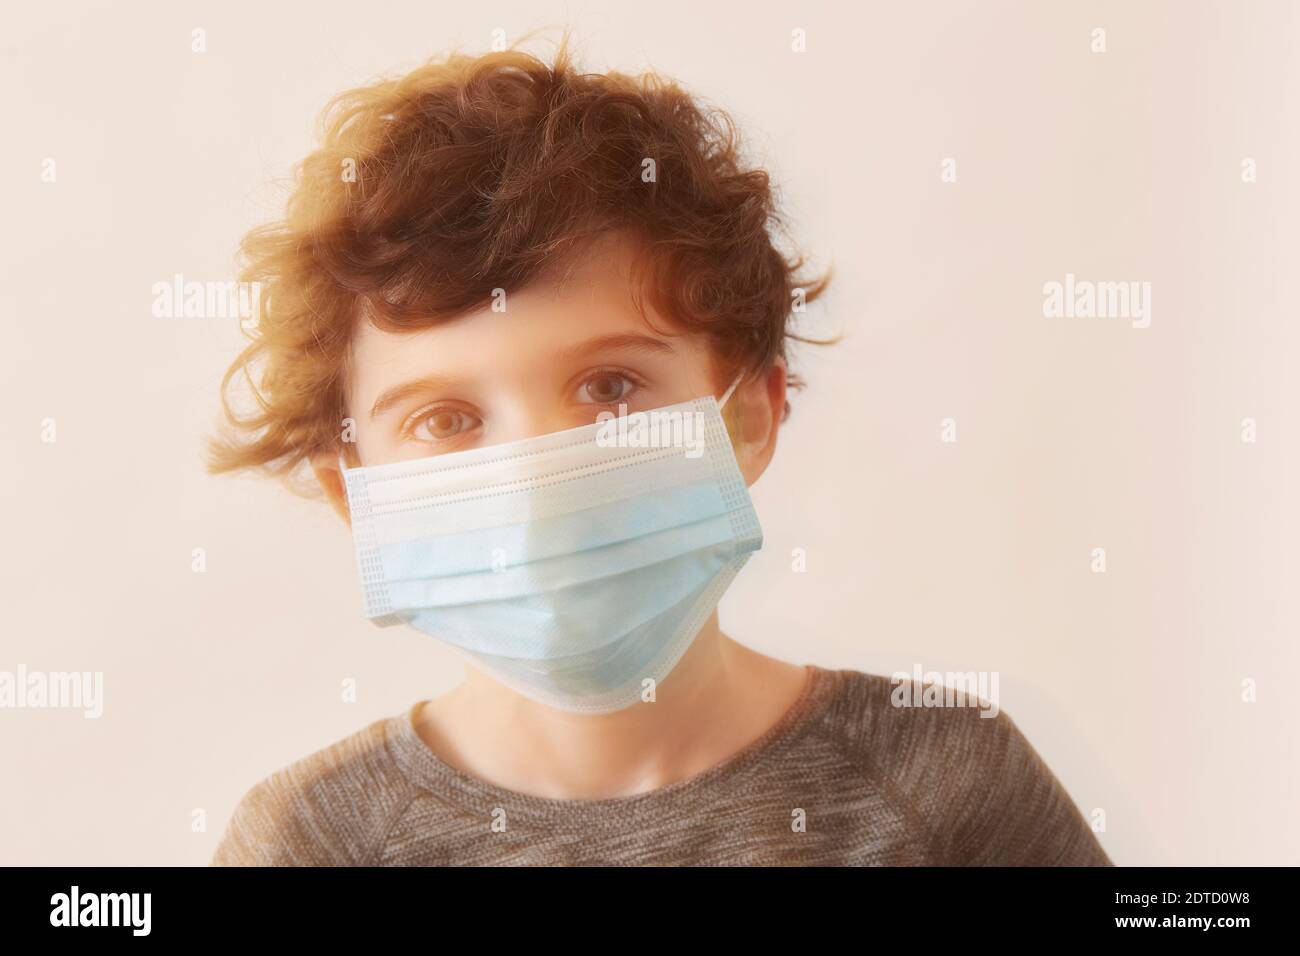 Boy (8-9) wearing protective face mask Stock Photo